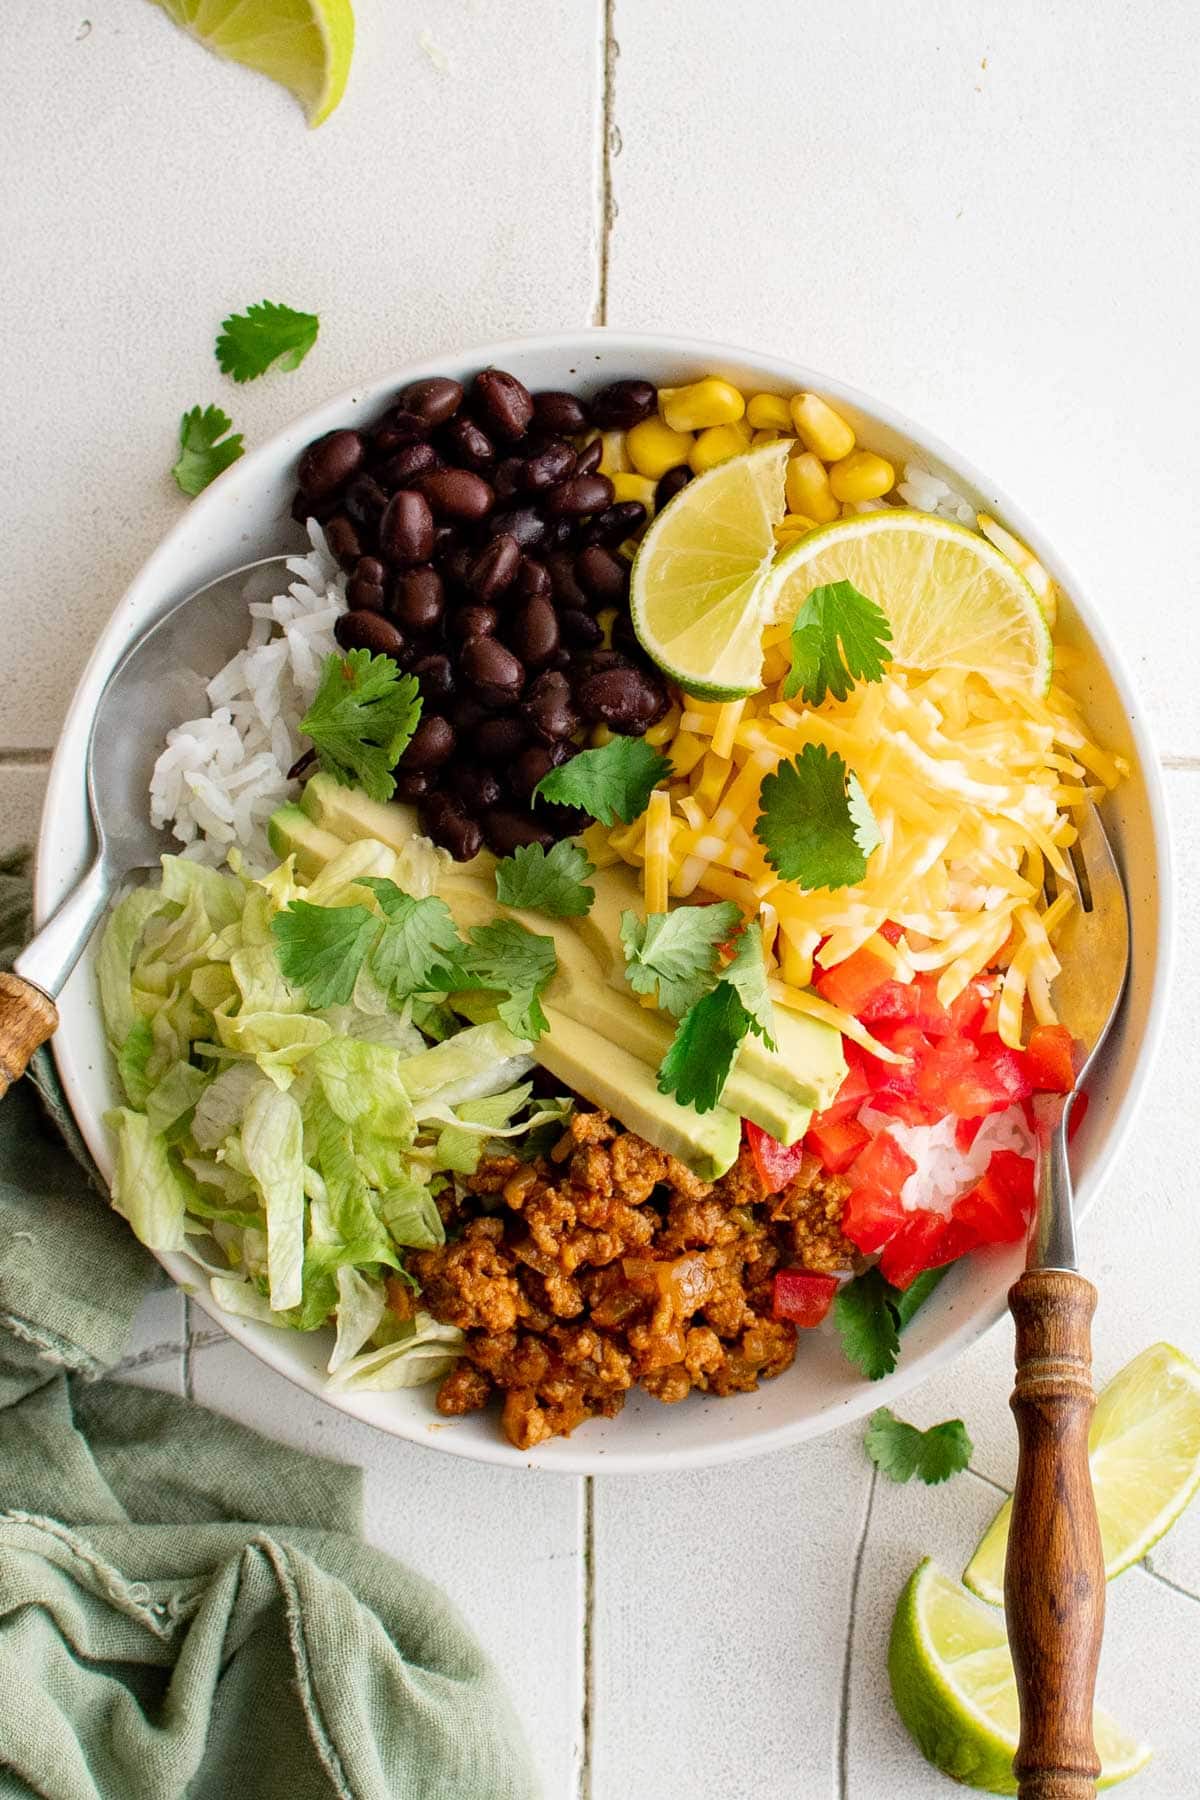 Turkey Taco bowl with rice, lettuce, tomatoes, beans, cheese and cilantro.